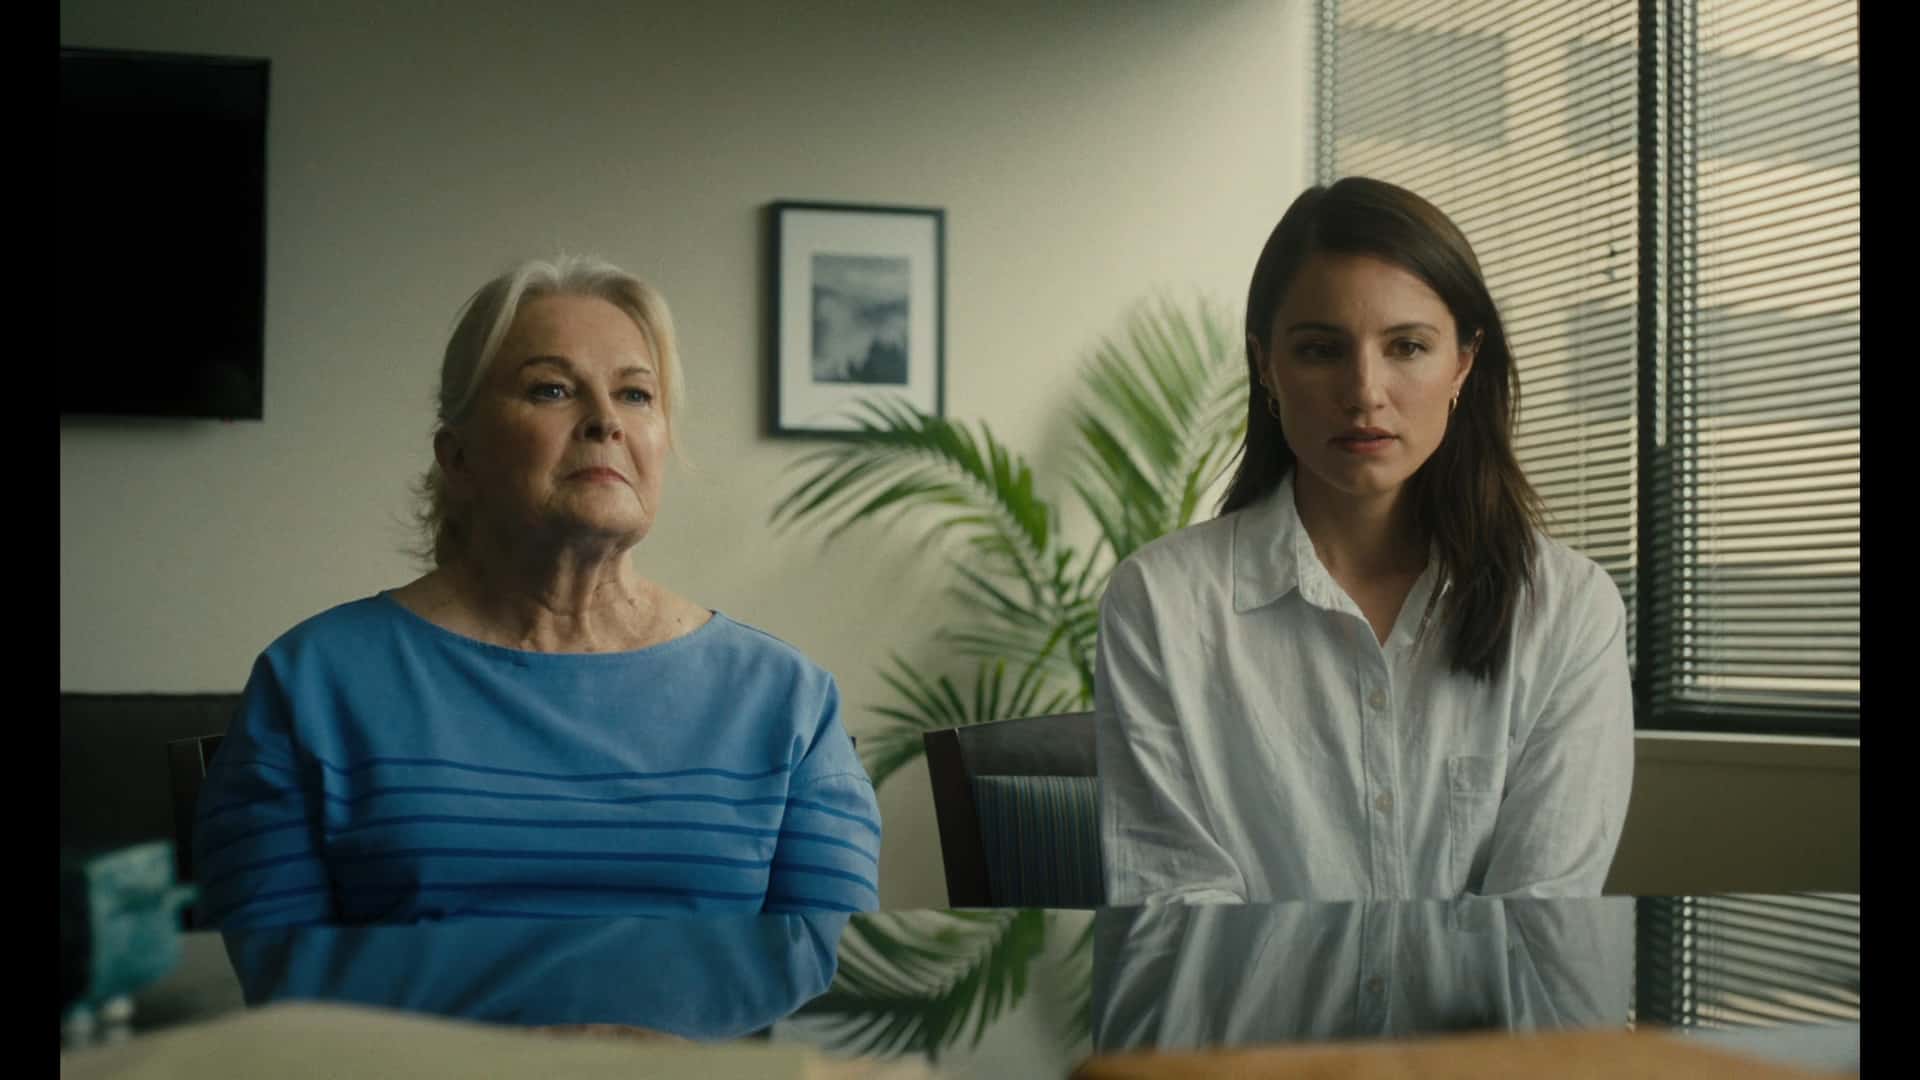 Barbara (Candice Bergen) and Abigail (Dianna Agron) talking to a doctor